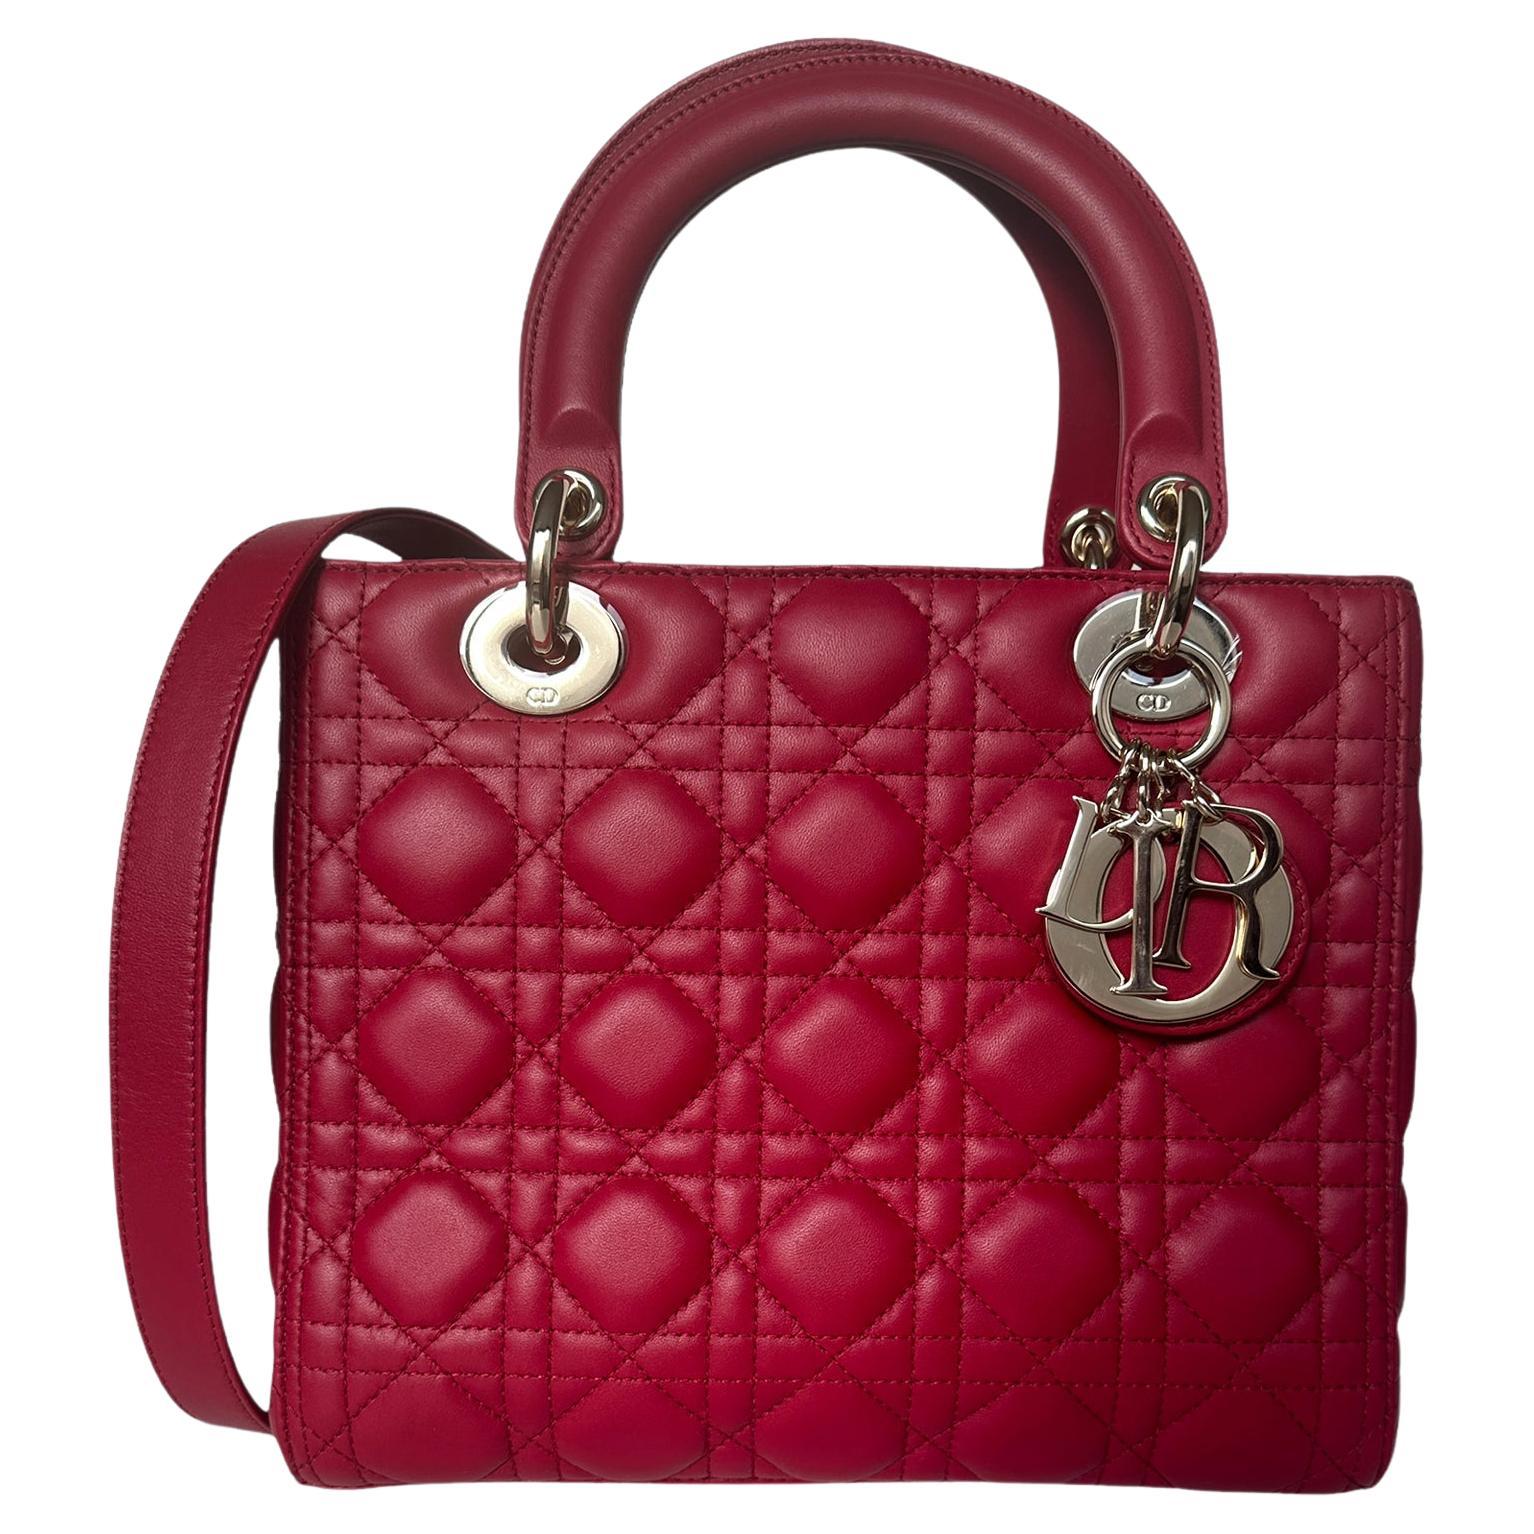 Christian Dior Red Leather Cannage Quilted Medium Lady Dior Bag